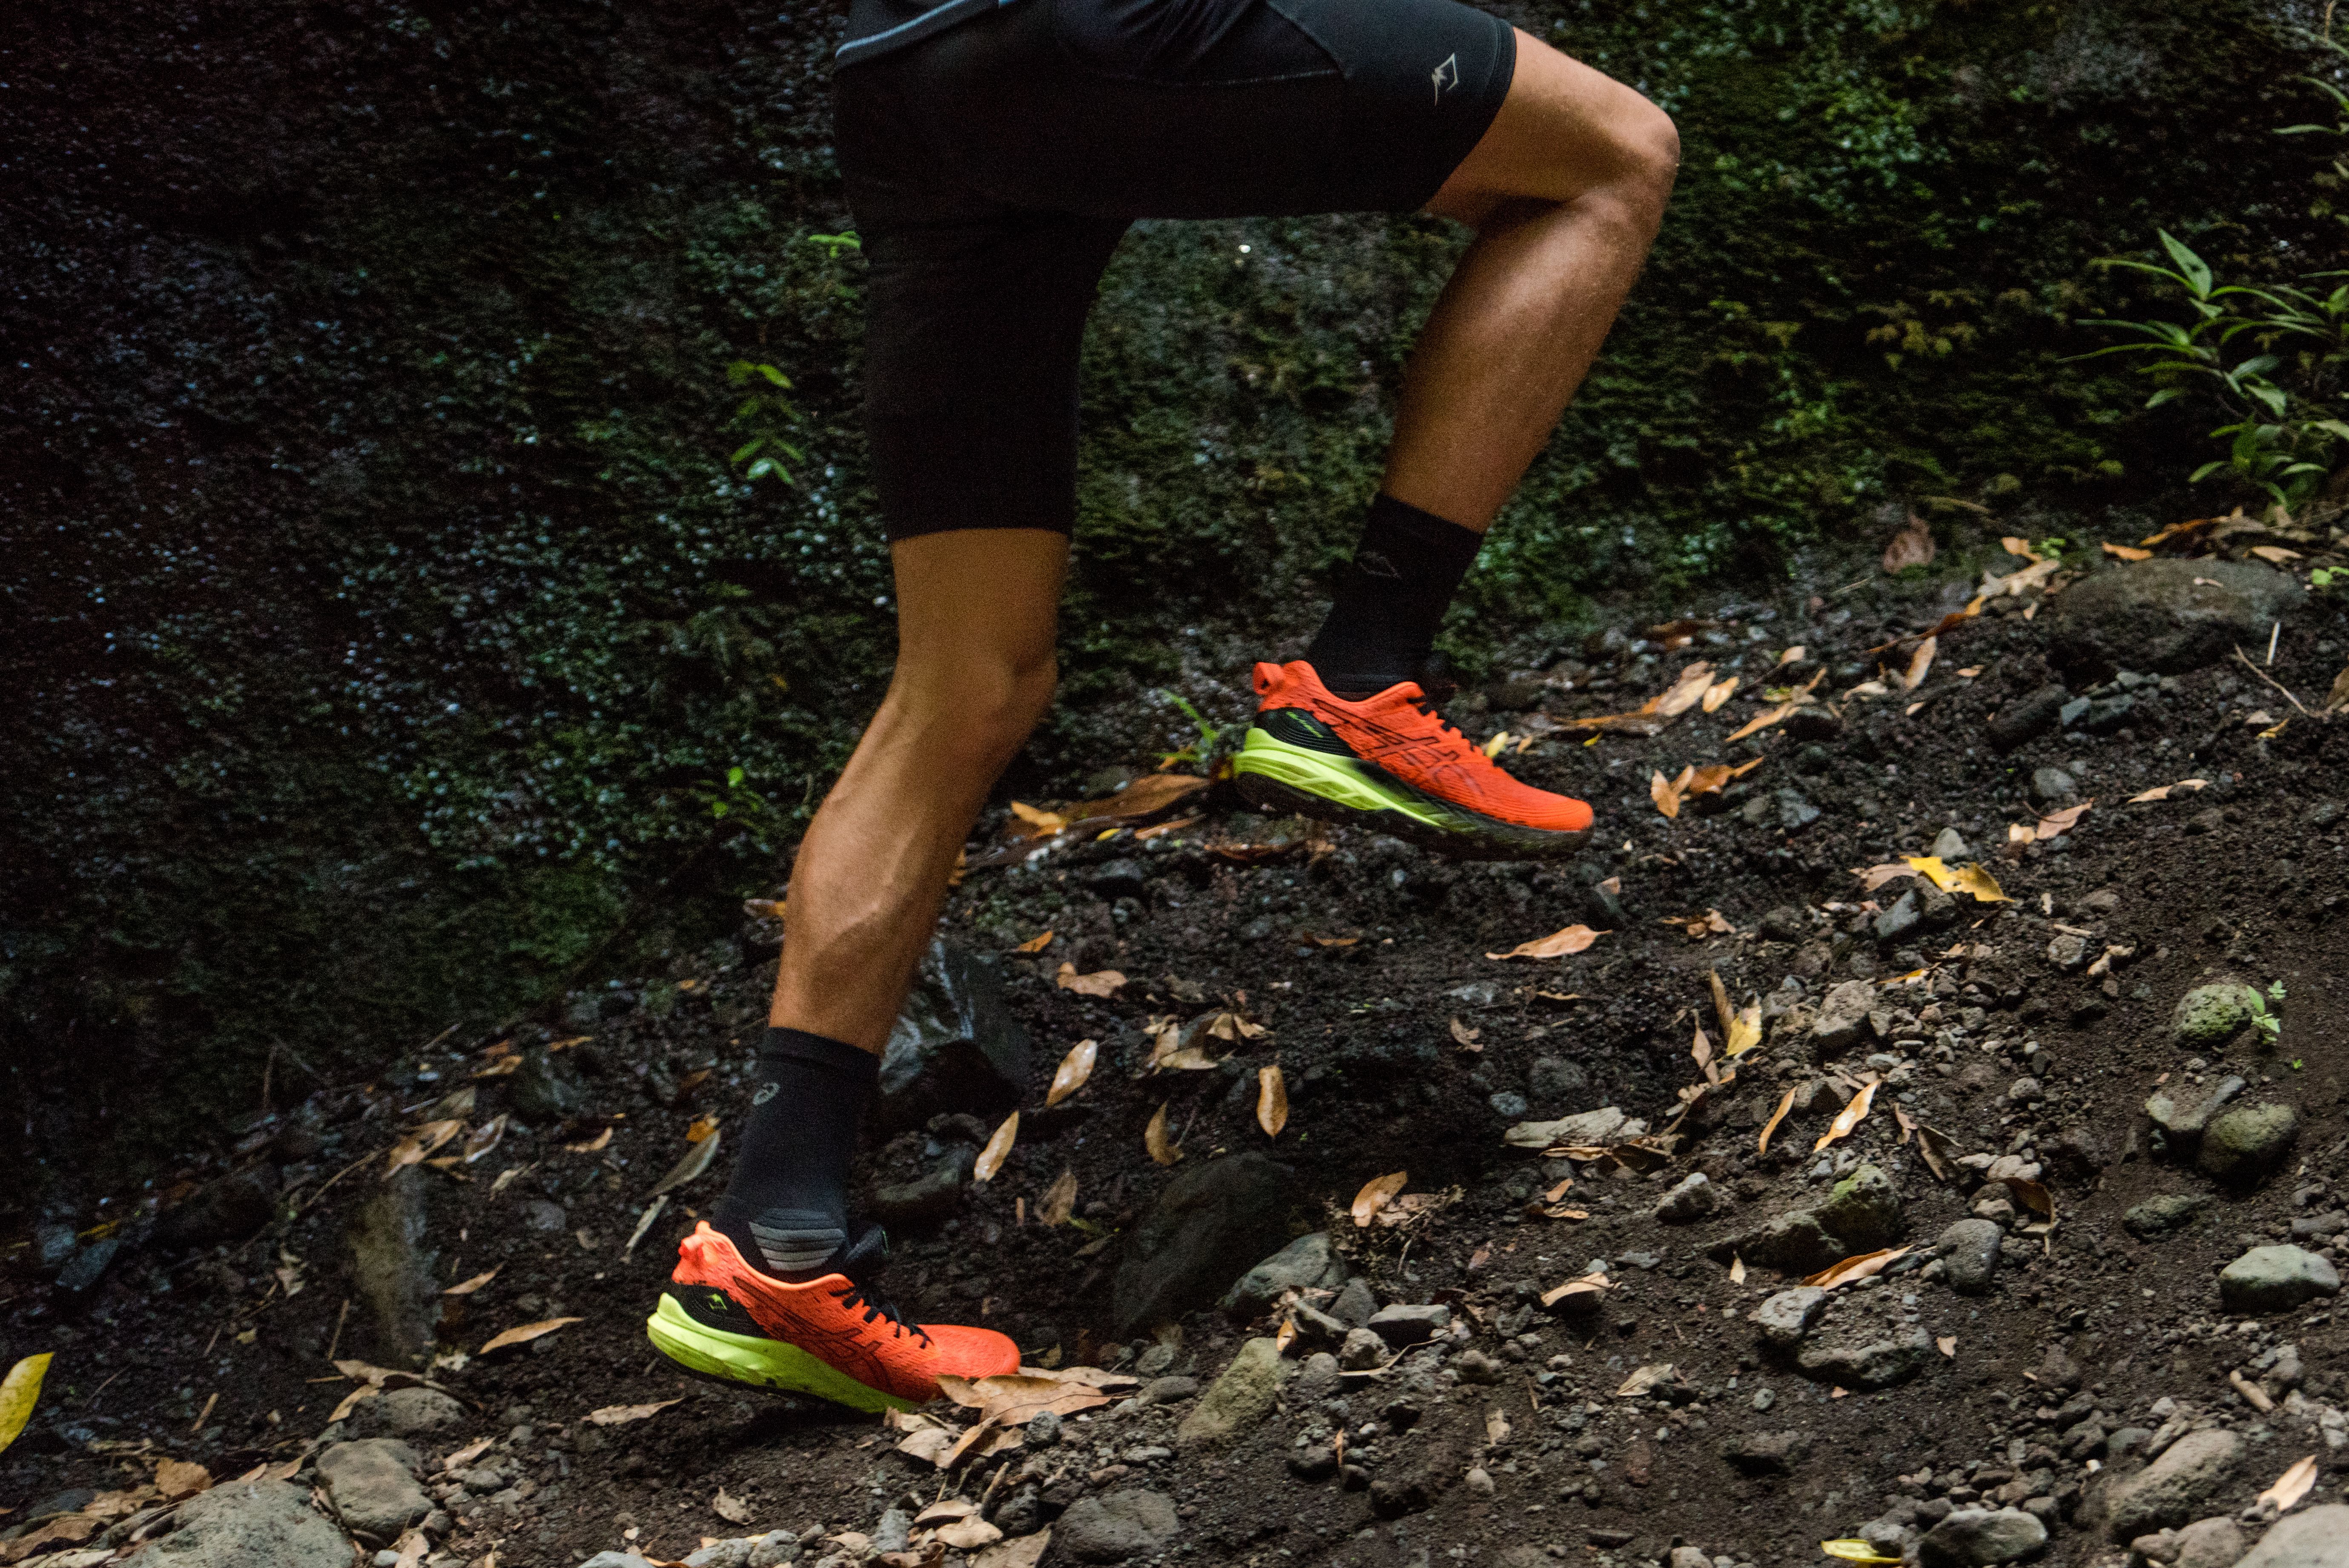 Asics Buys Runkeeper in Another Shoe and Software Team-Up